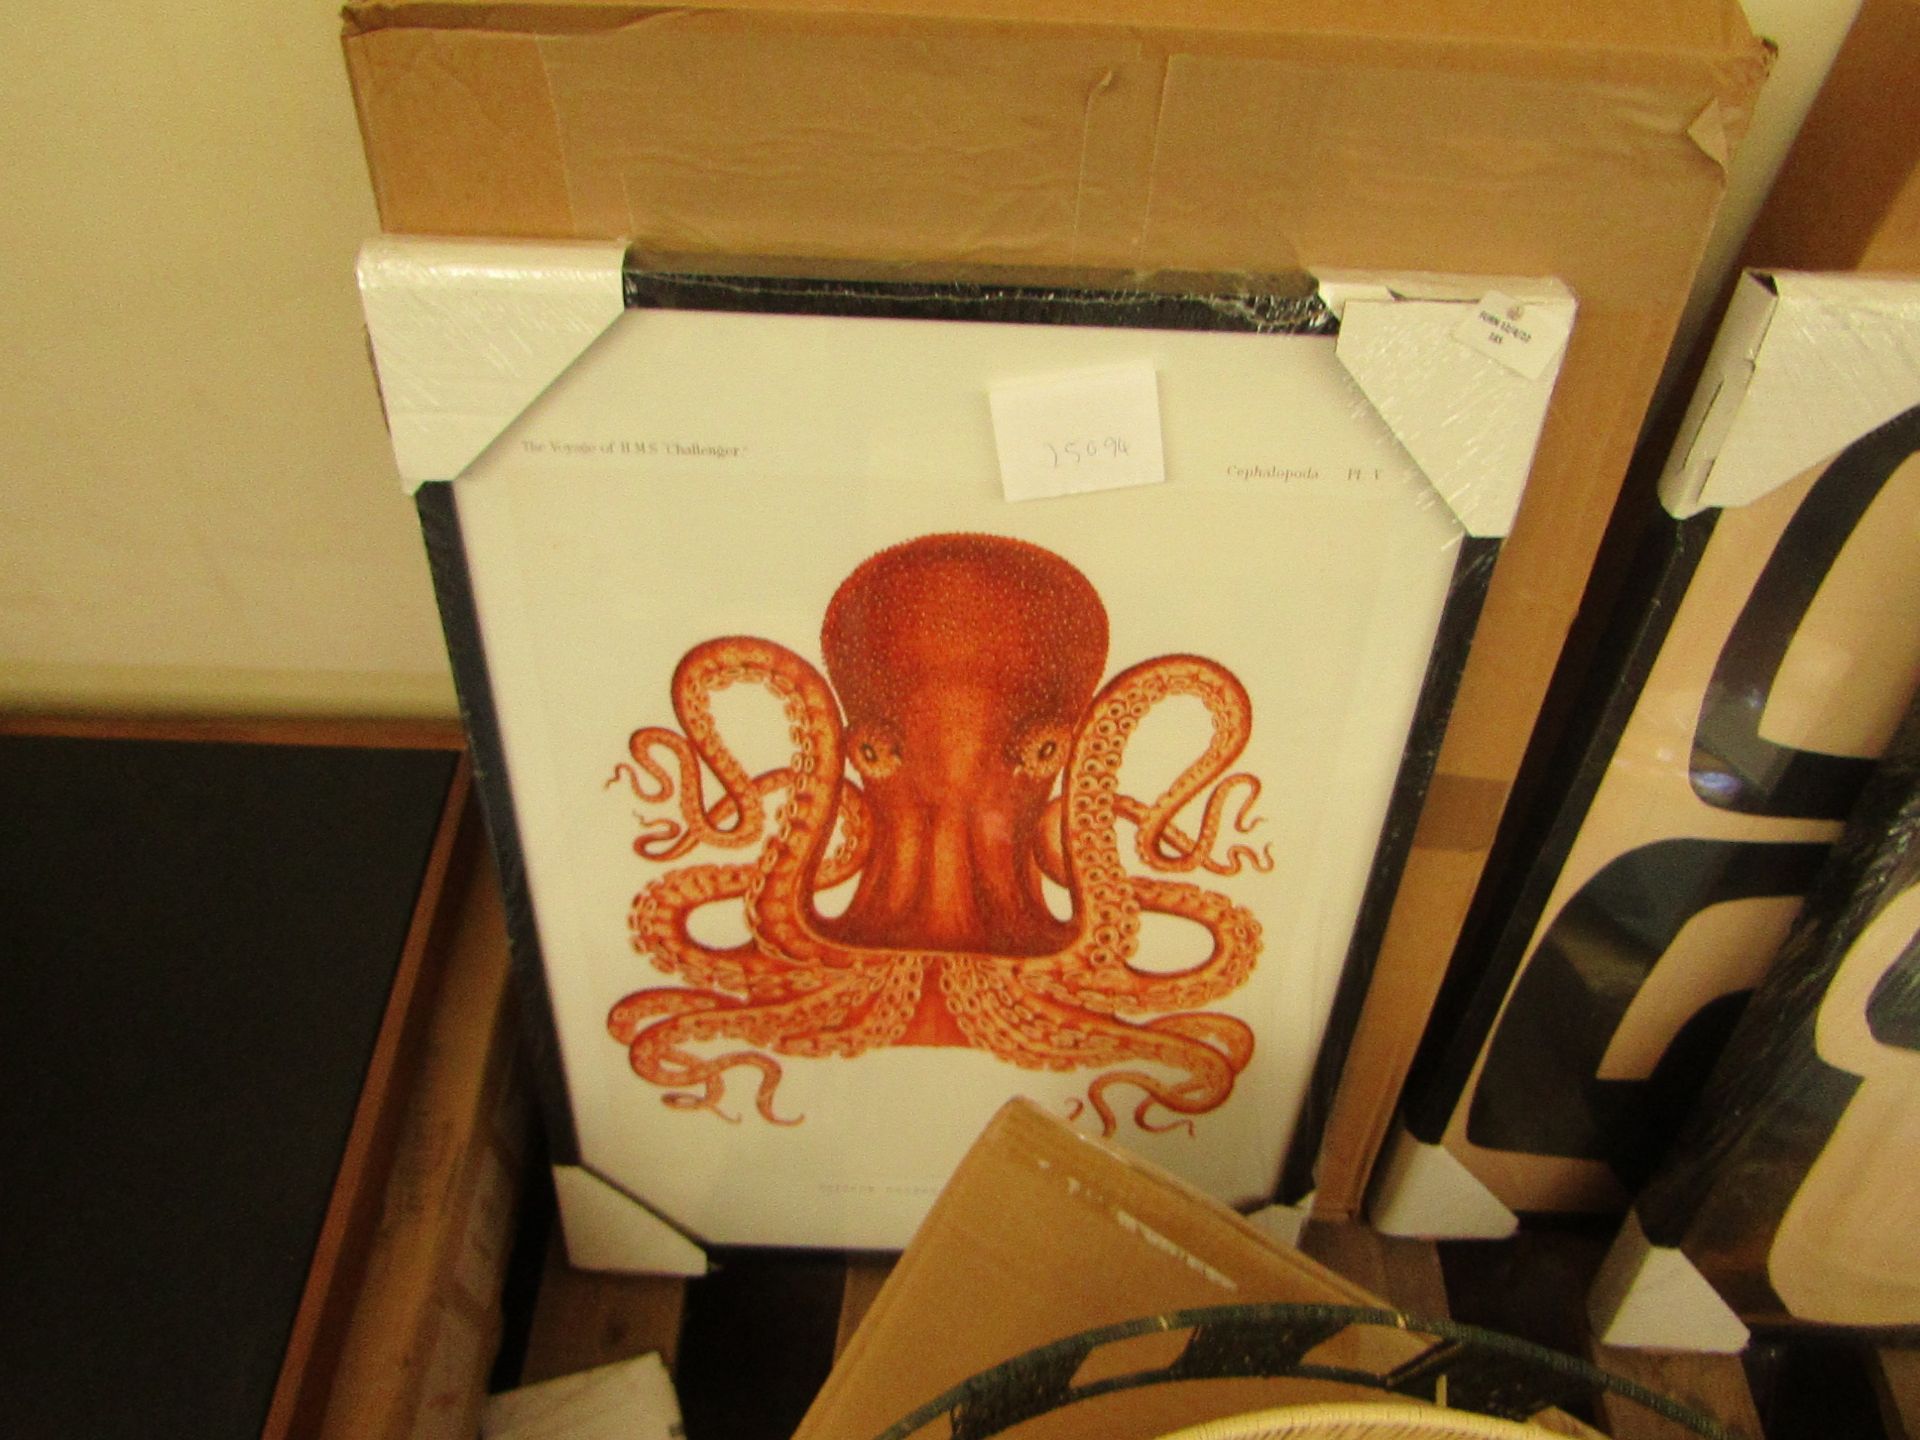 | 1X | MADE.COM NATURAL HISTORY MUSEUM VINTAGE OCTUPUS FRAMED PRINT | GOOD CONDITION & BOXED |